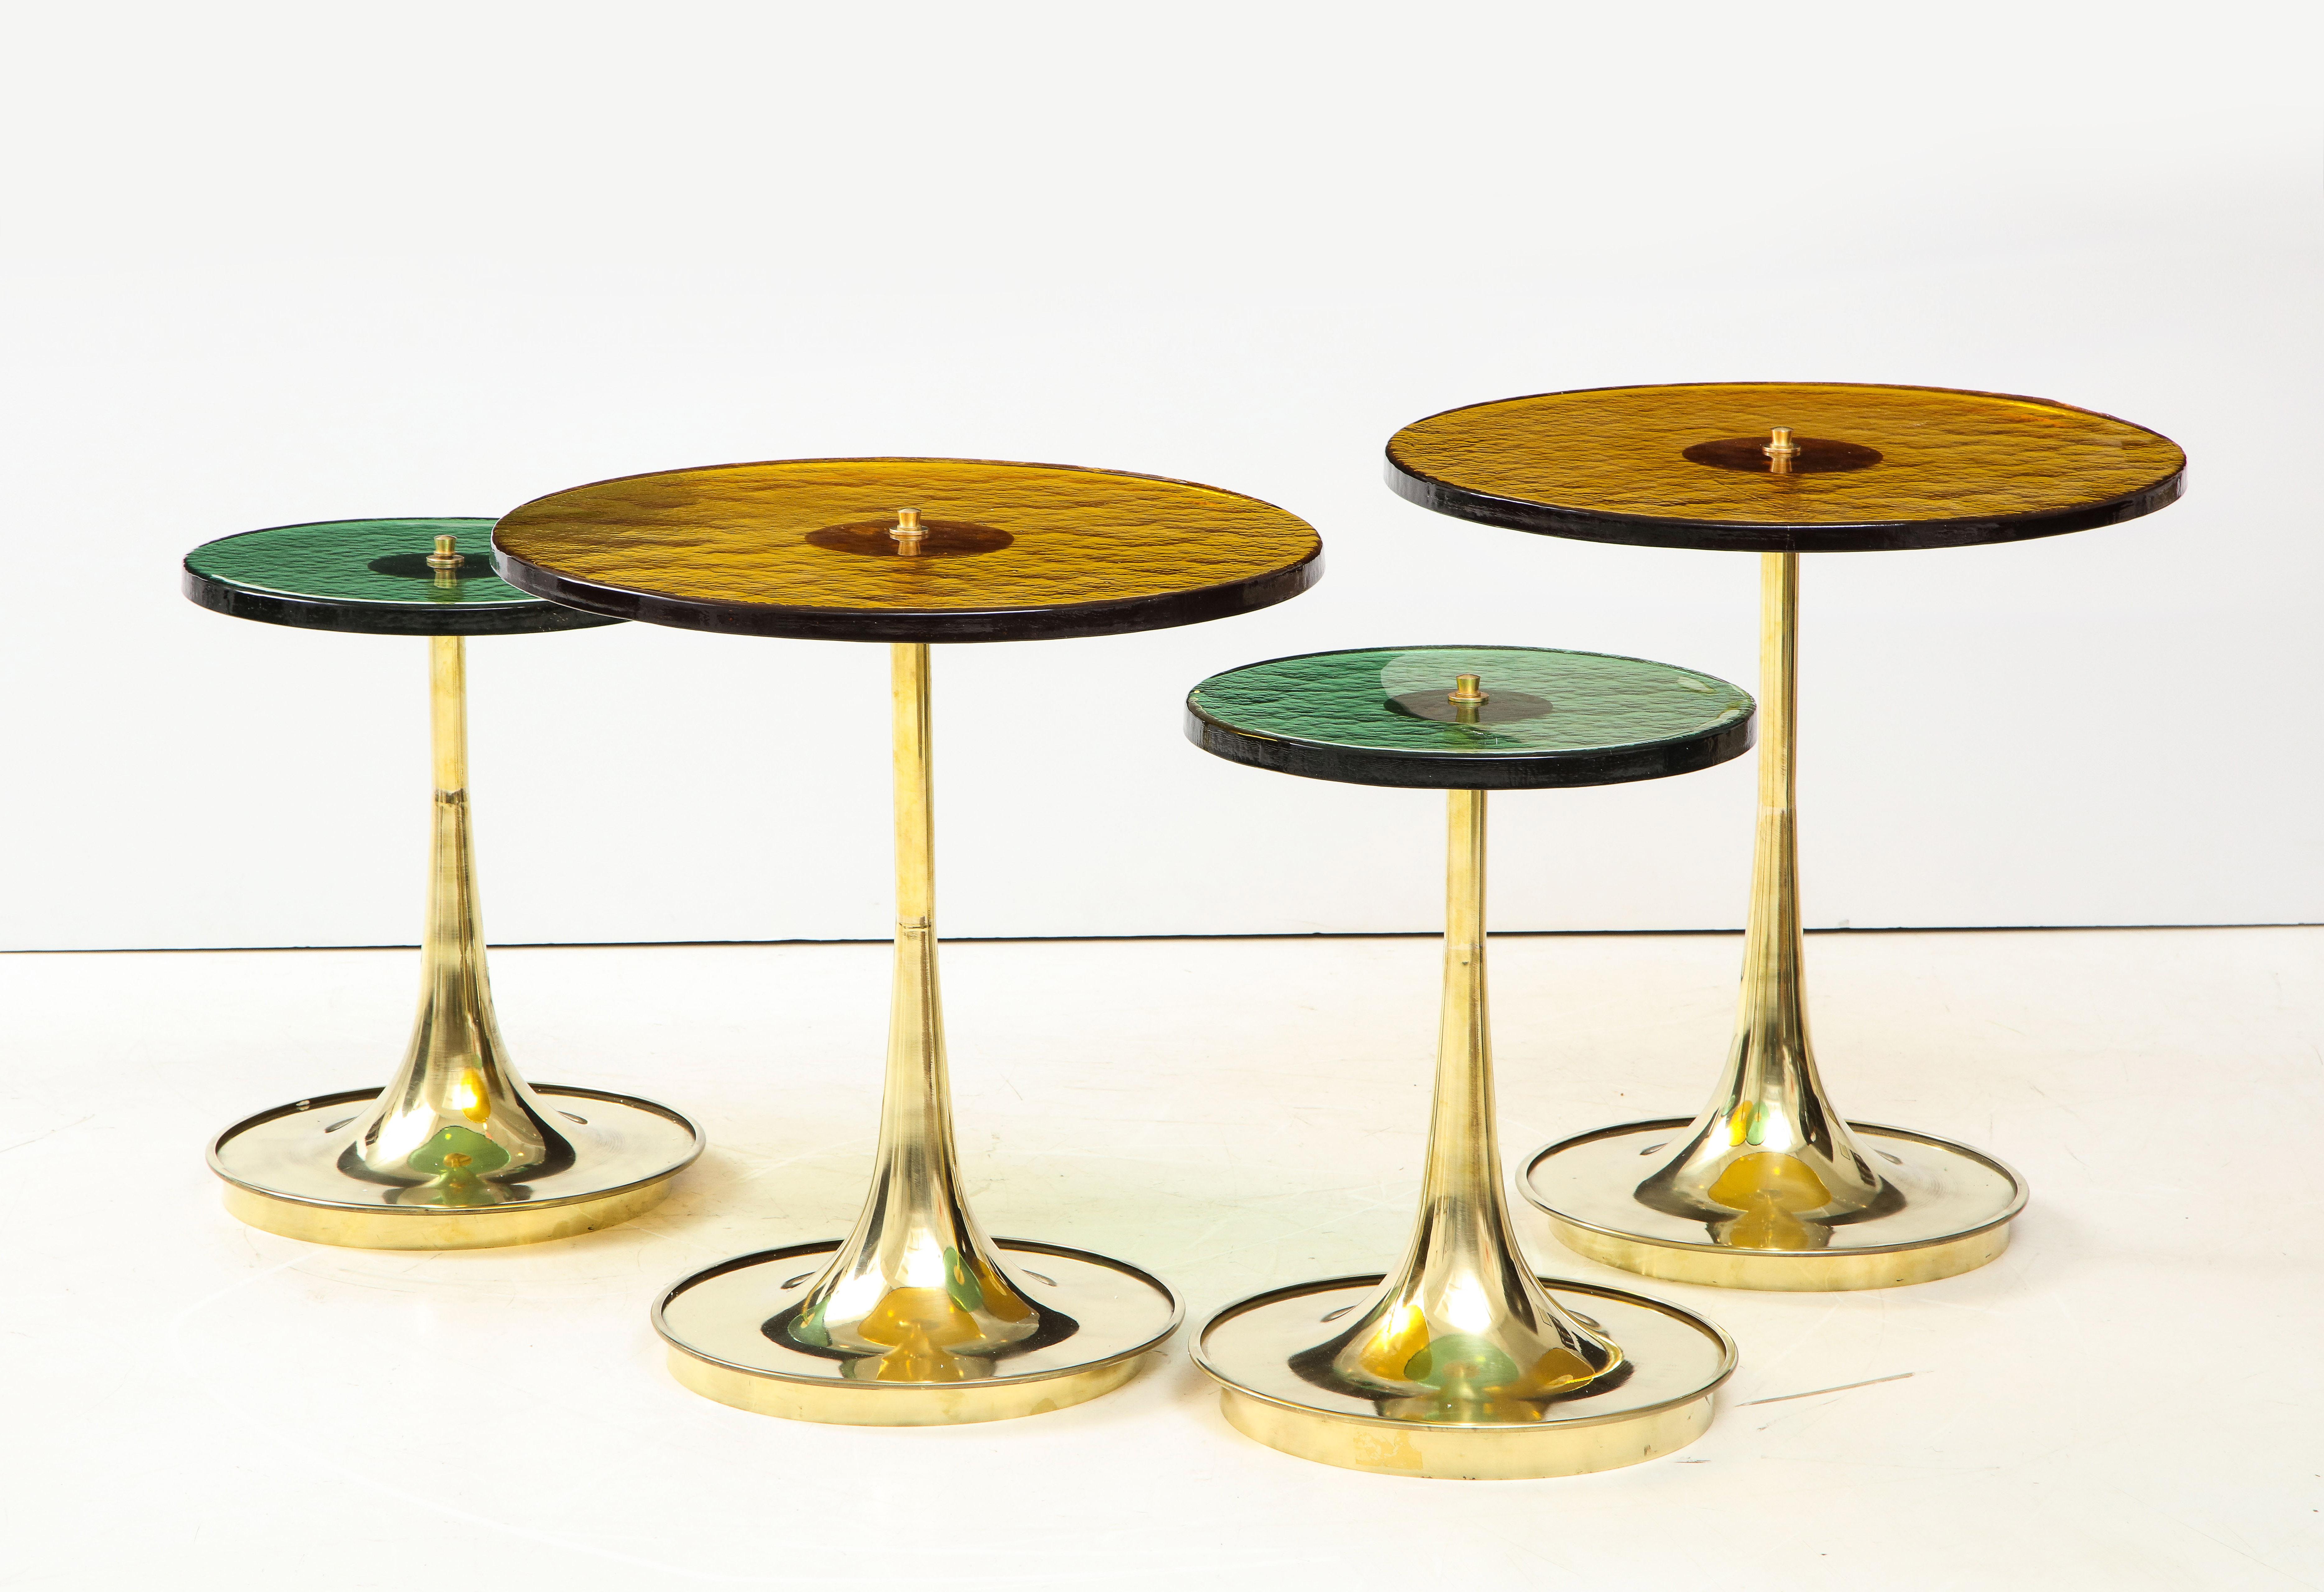 Set of four (4) round bronze and emerald green murano glass and brass martini or side tables, Italy. Hand-casted thick and solid bronze colored and emerald green Murano round glass tops sit on hand-turned trumpet-shaped brass bases. Modern flat top